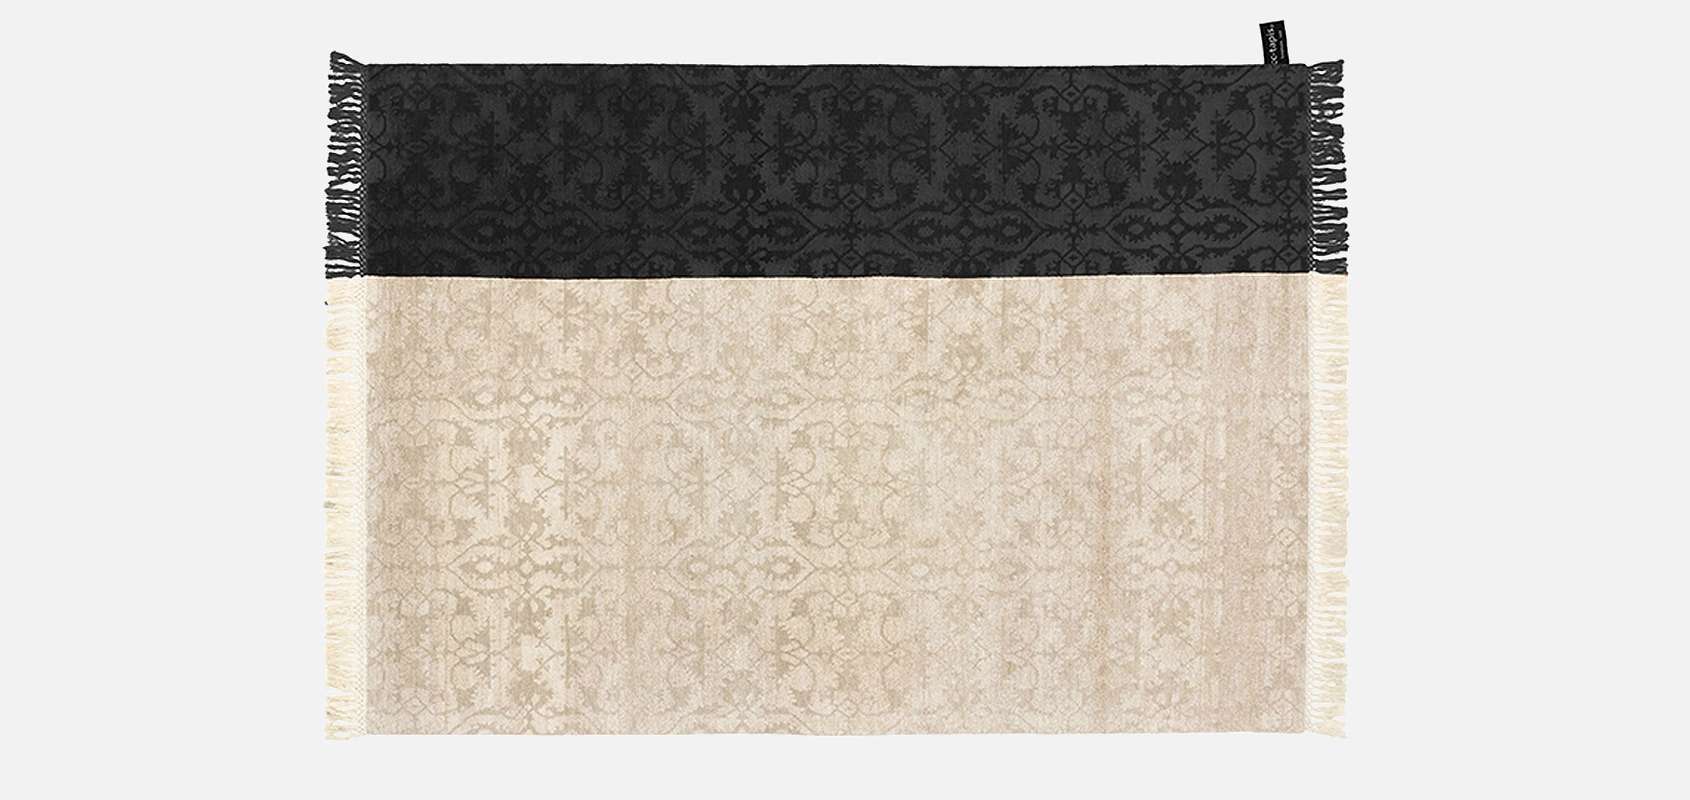 Dipped Lotto Rug - Black